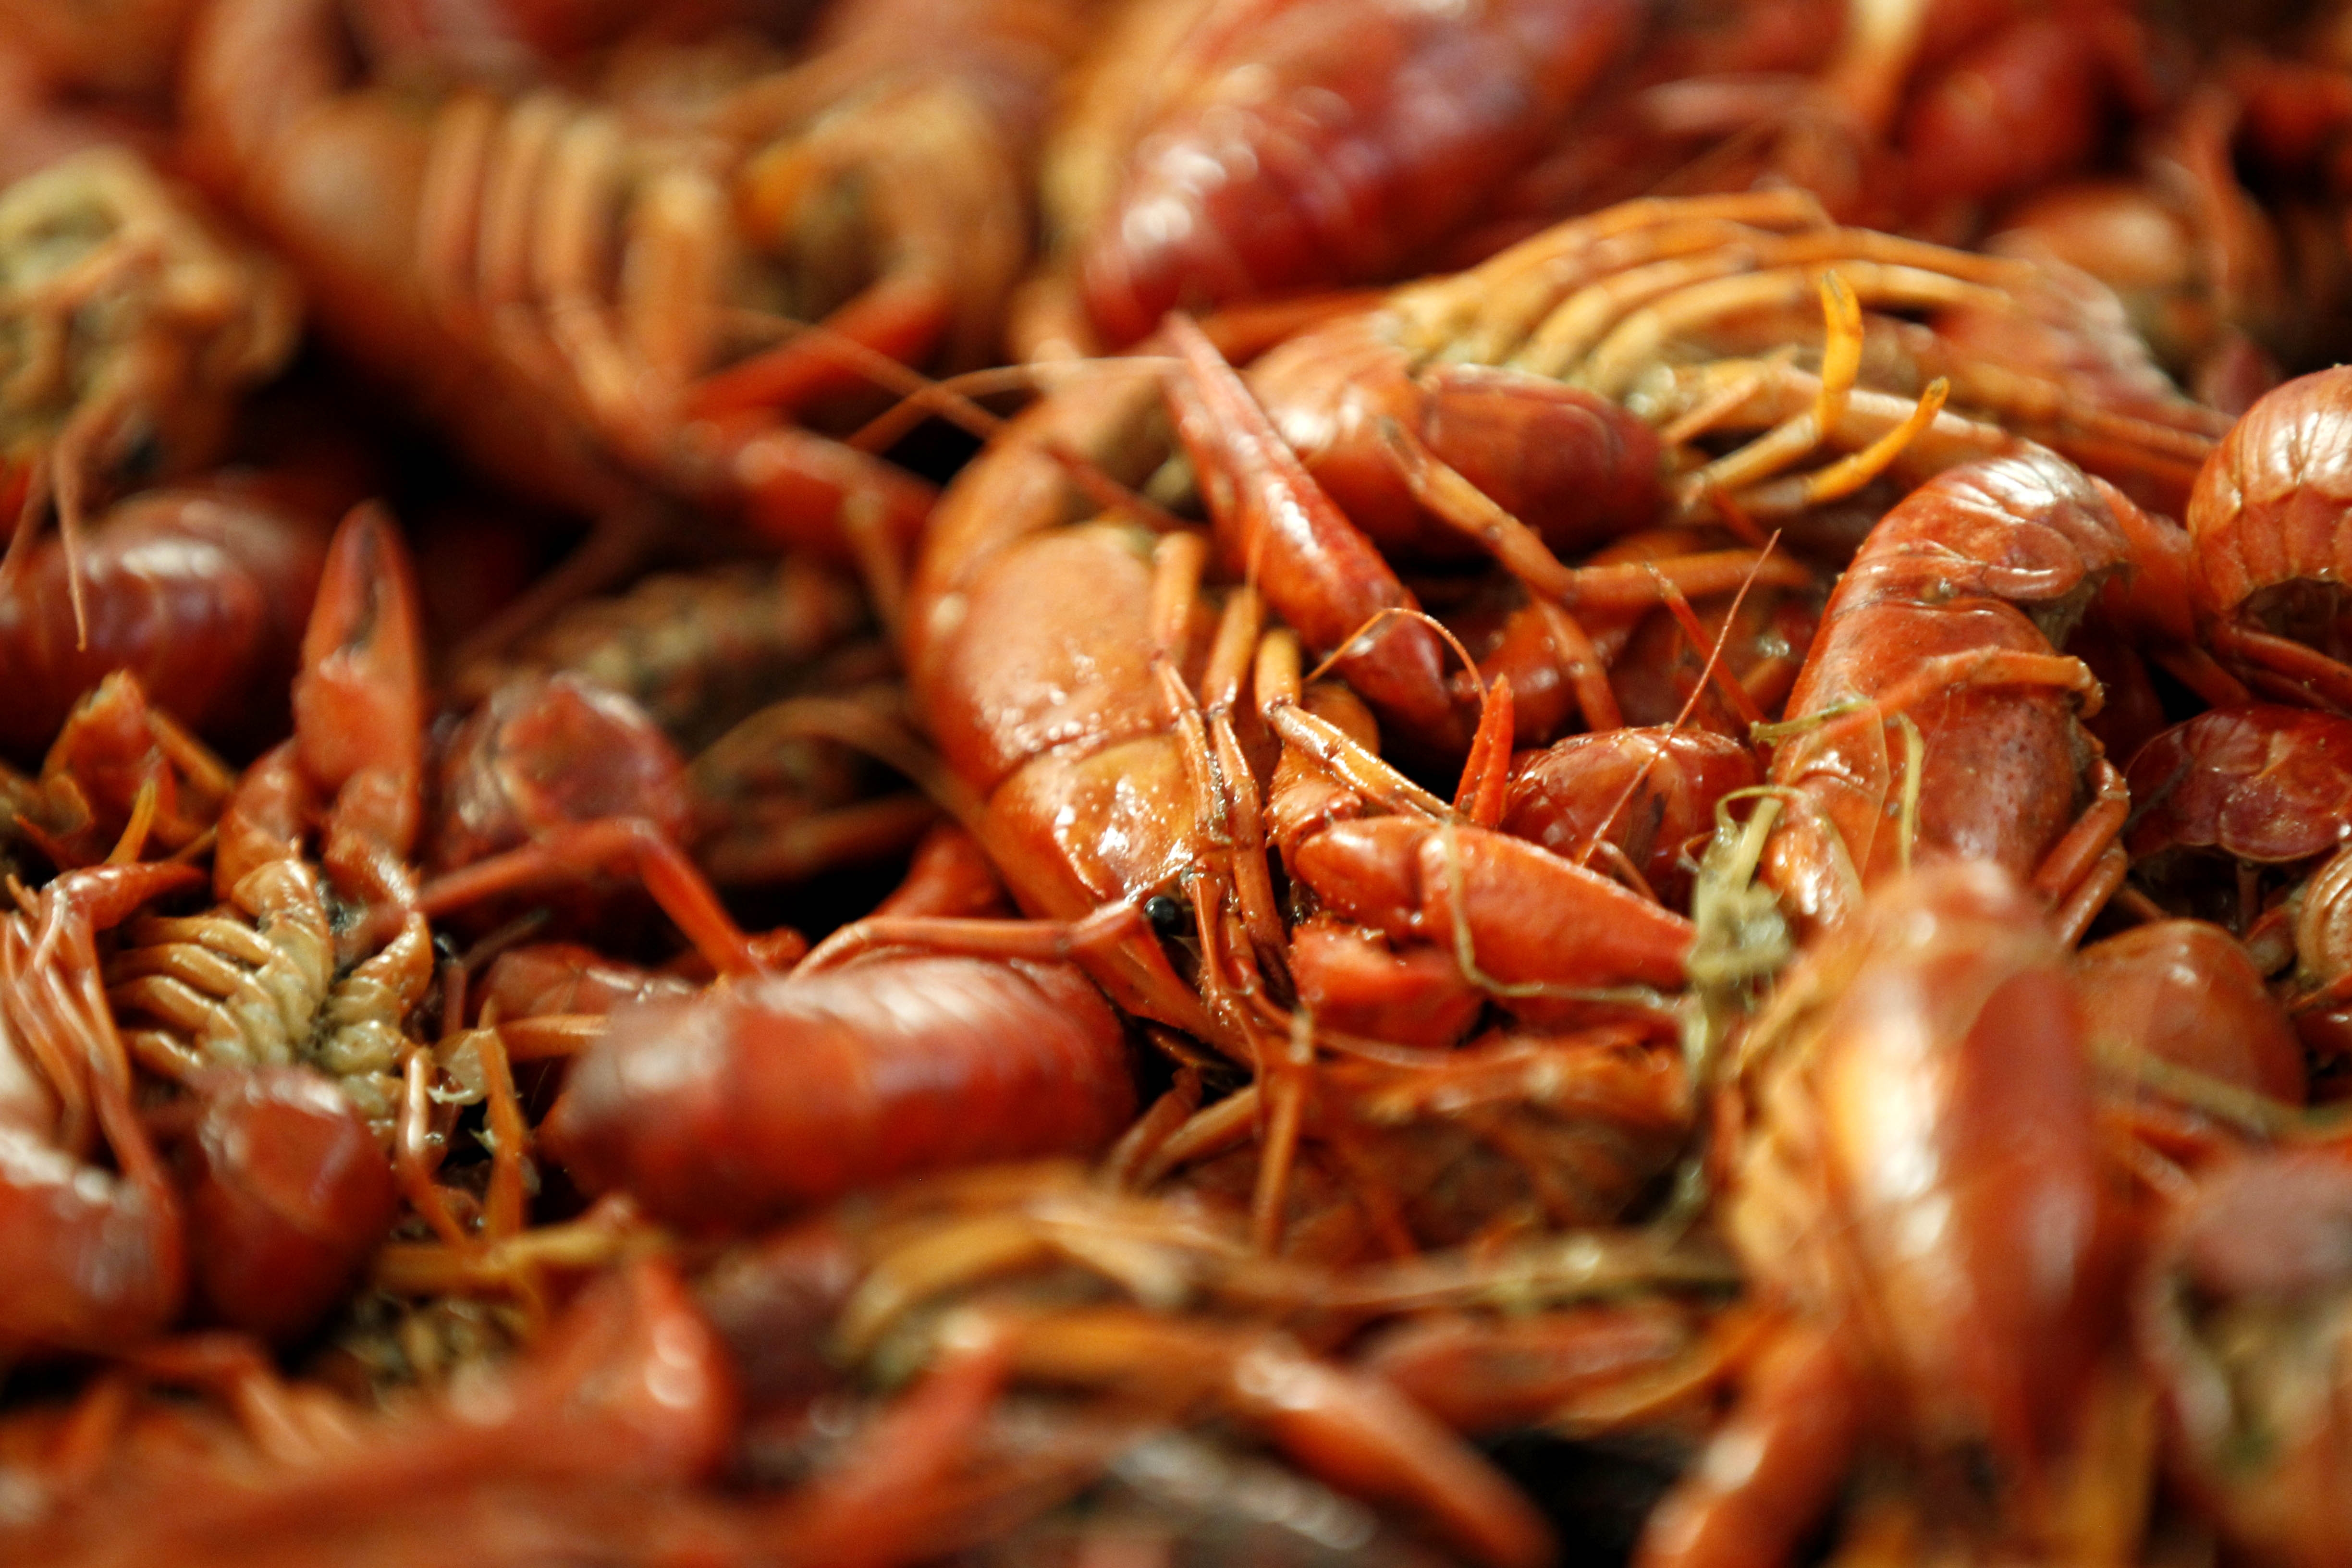 China and the US share a craze over crawfish